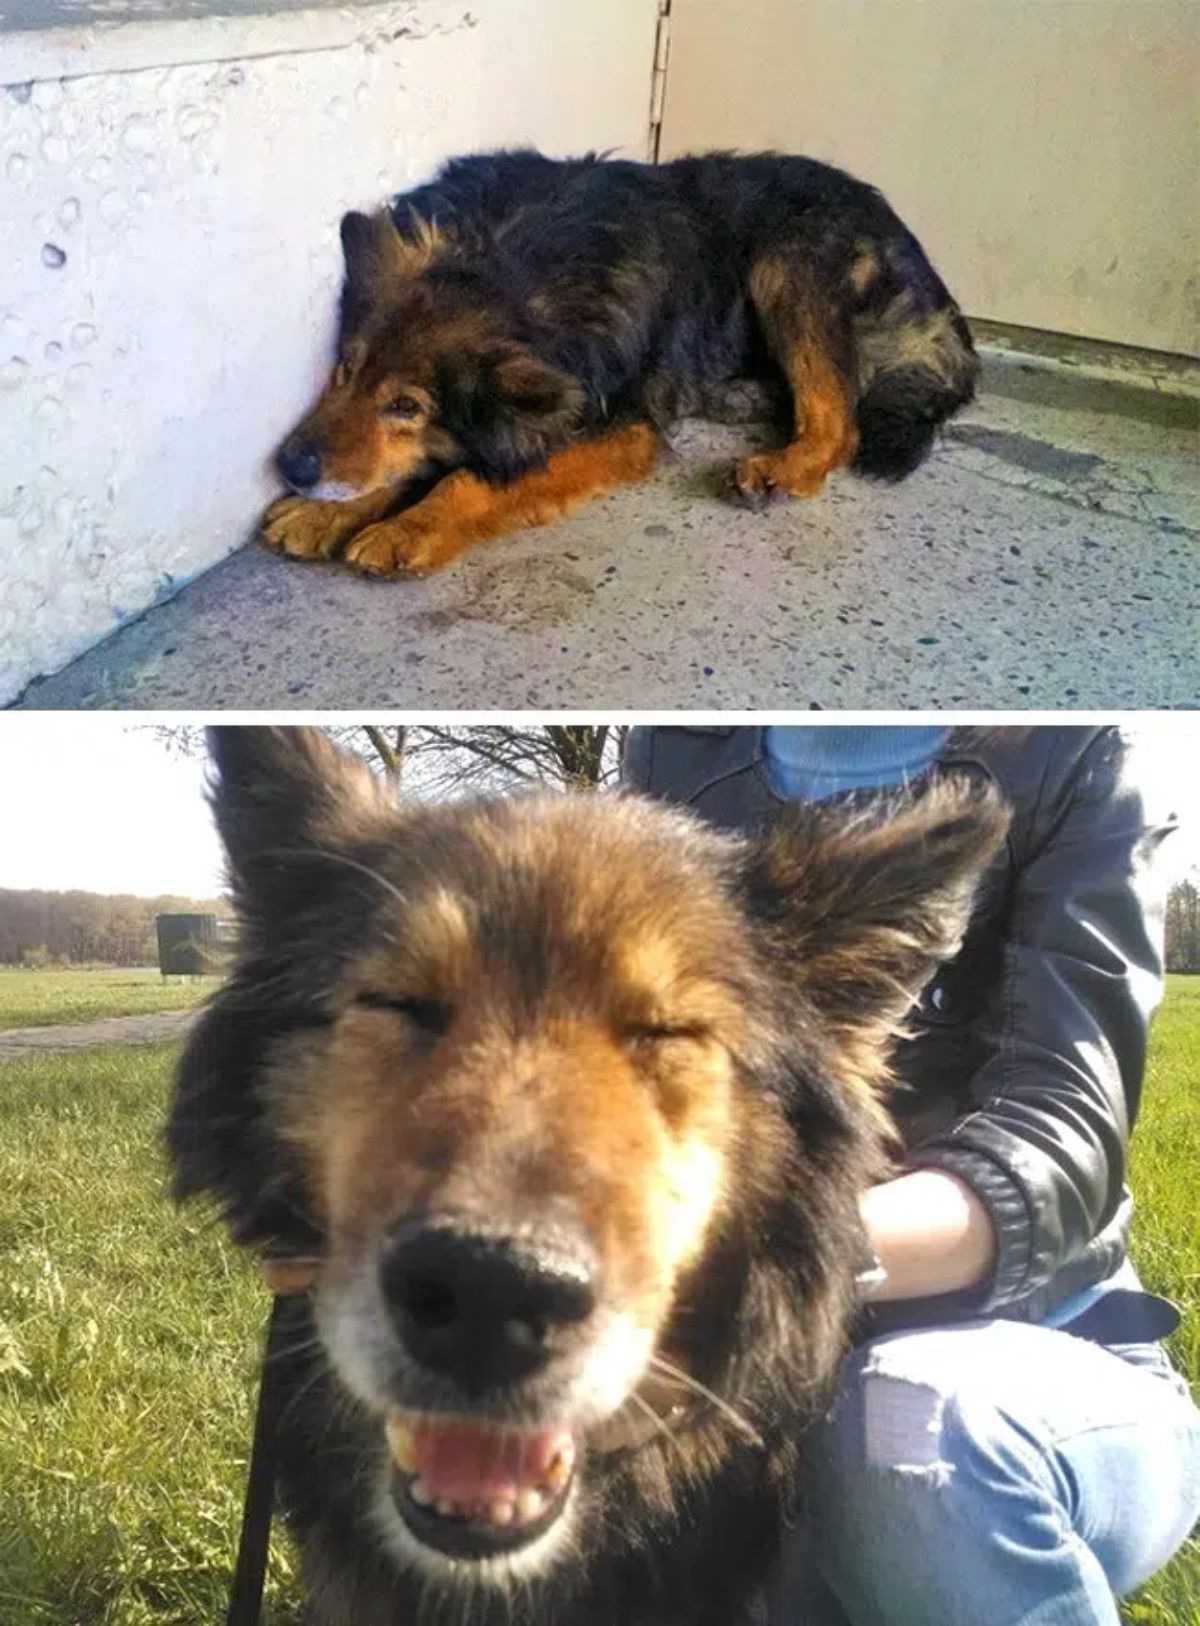 before photo of sad fluffy brown and black dog and after photo of happy brown and black fluffy dog